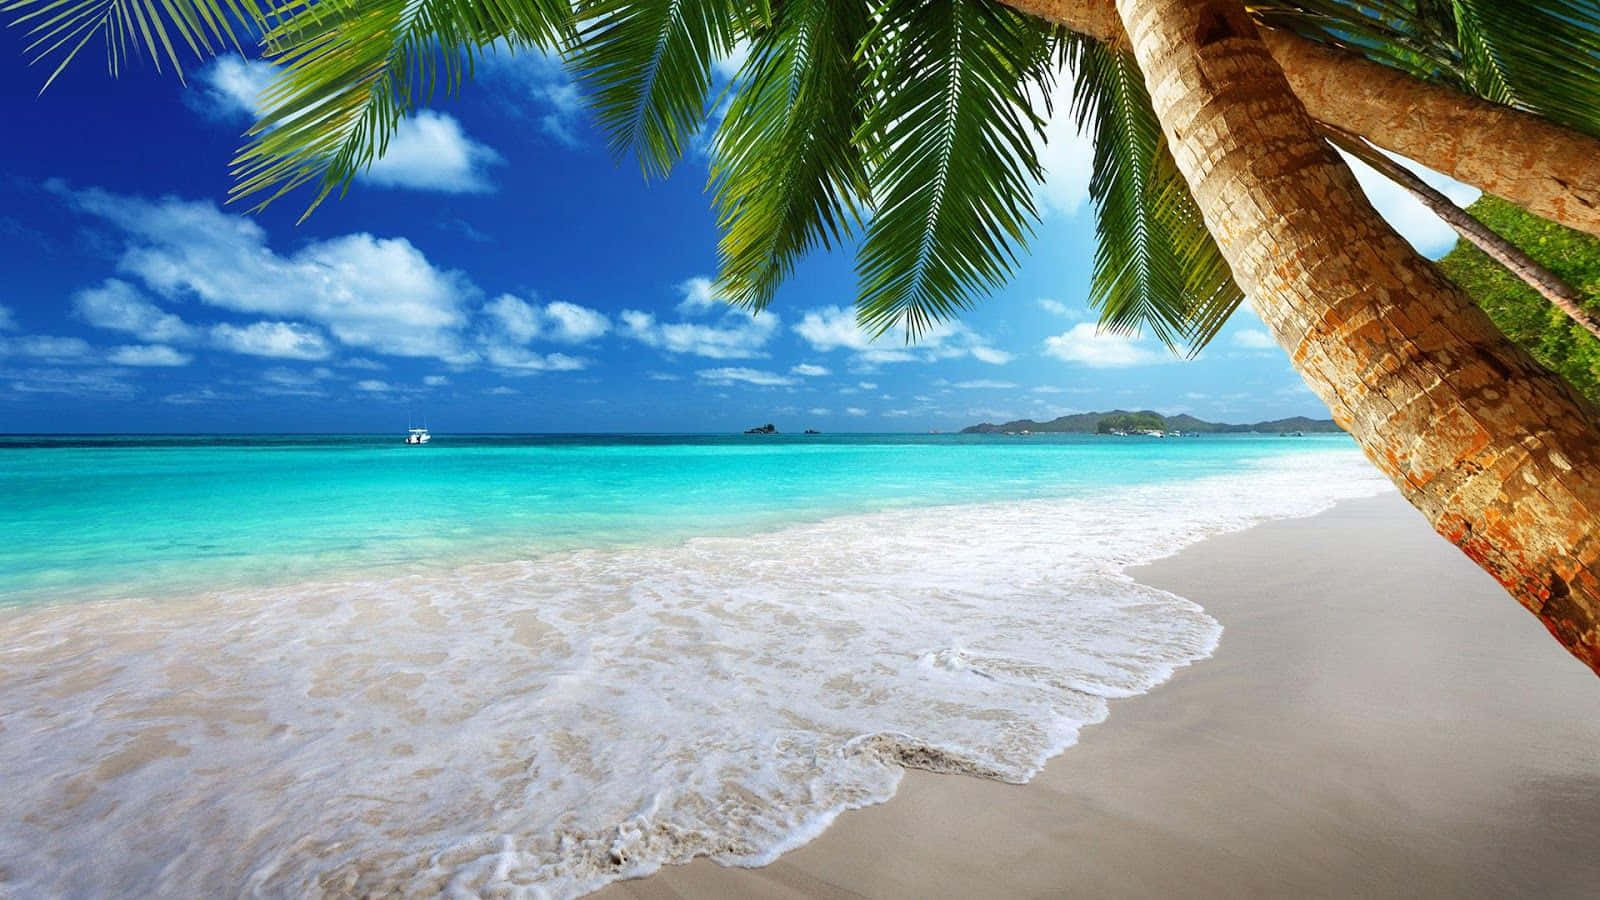 real beach background images